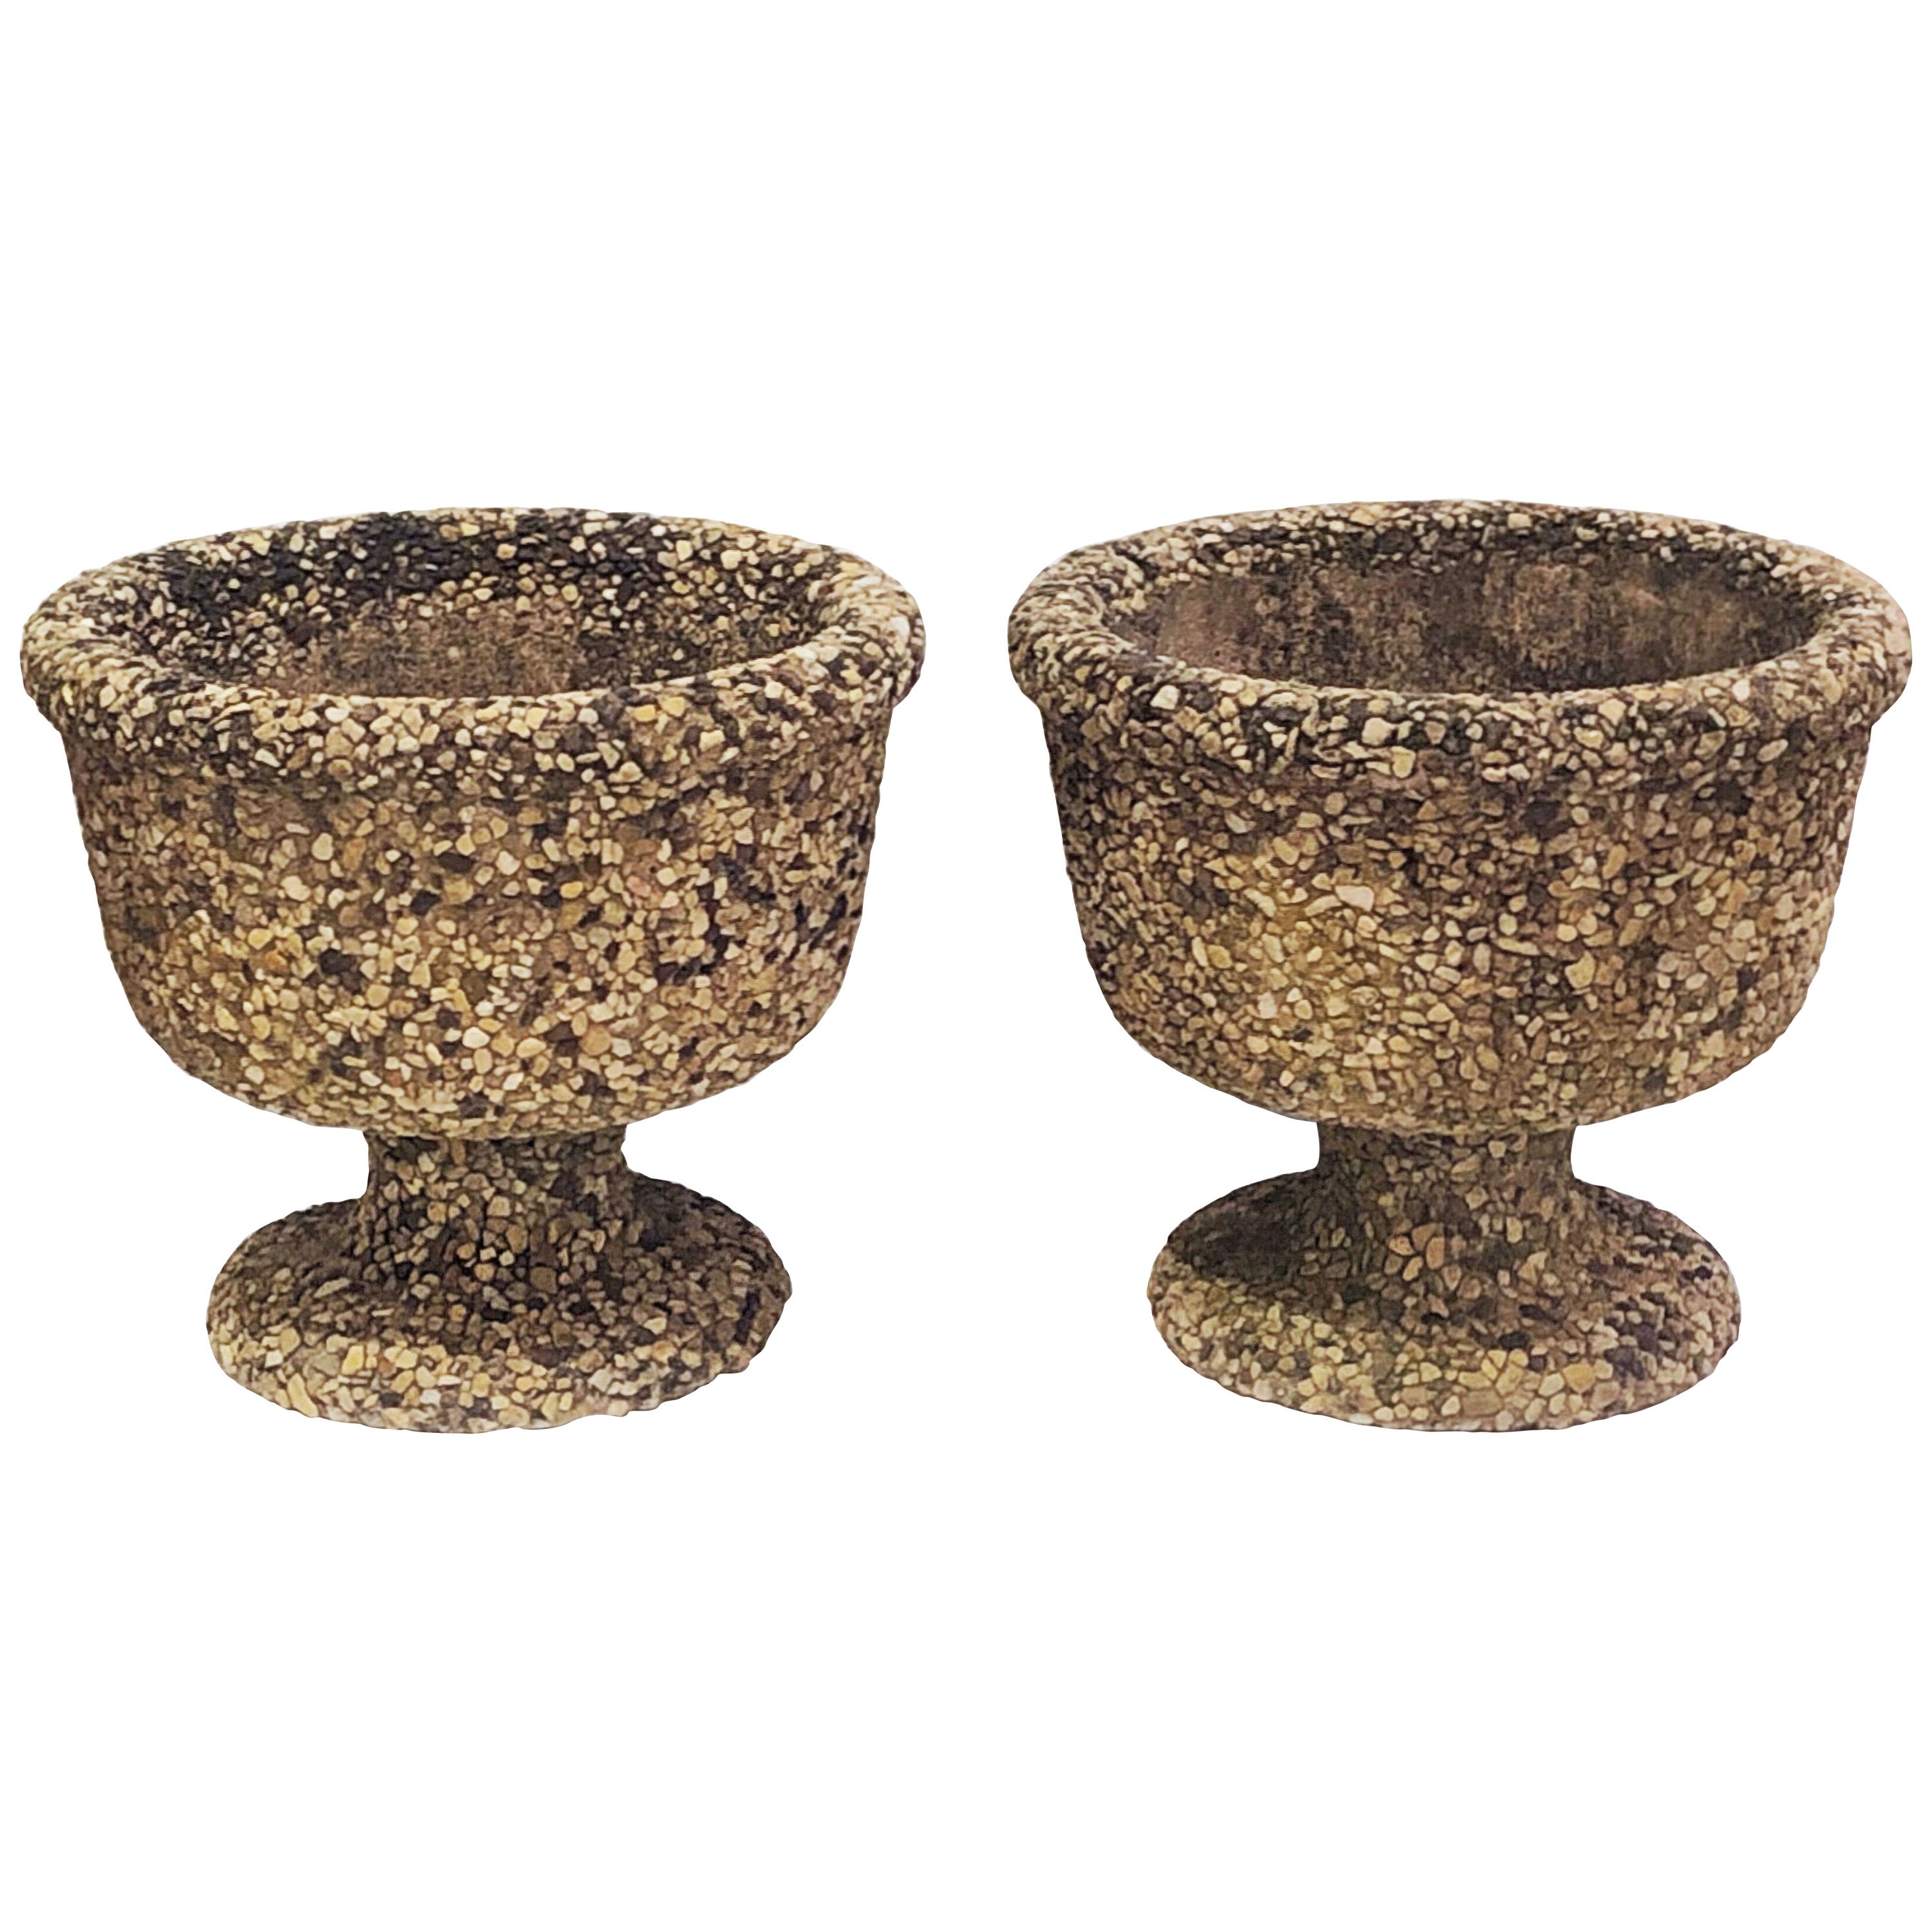 Pair of Biarritz Garden Urns or Planters with Pebble Inlay 'Individually Priced'